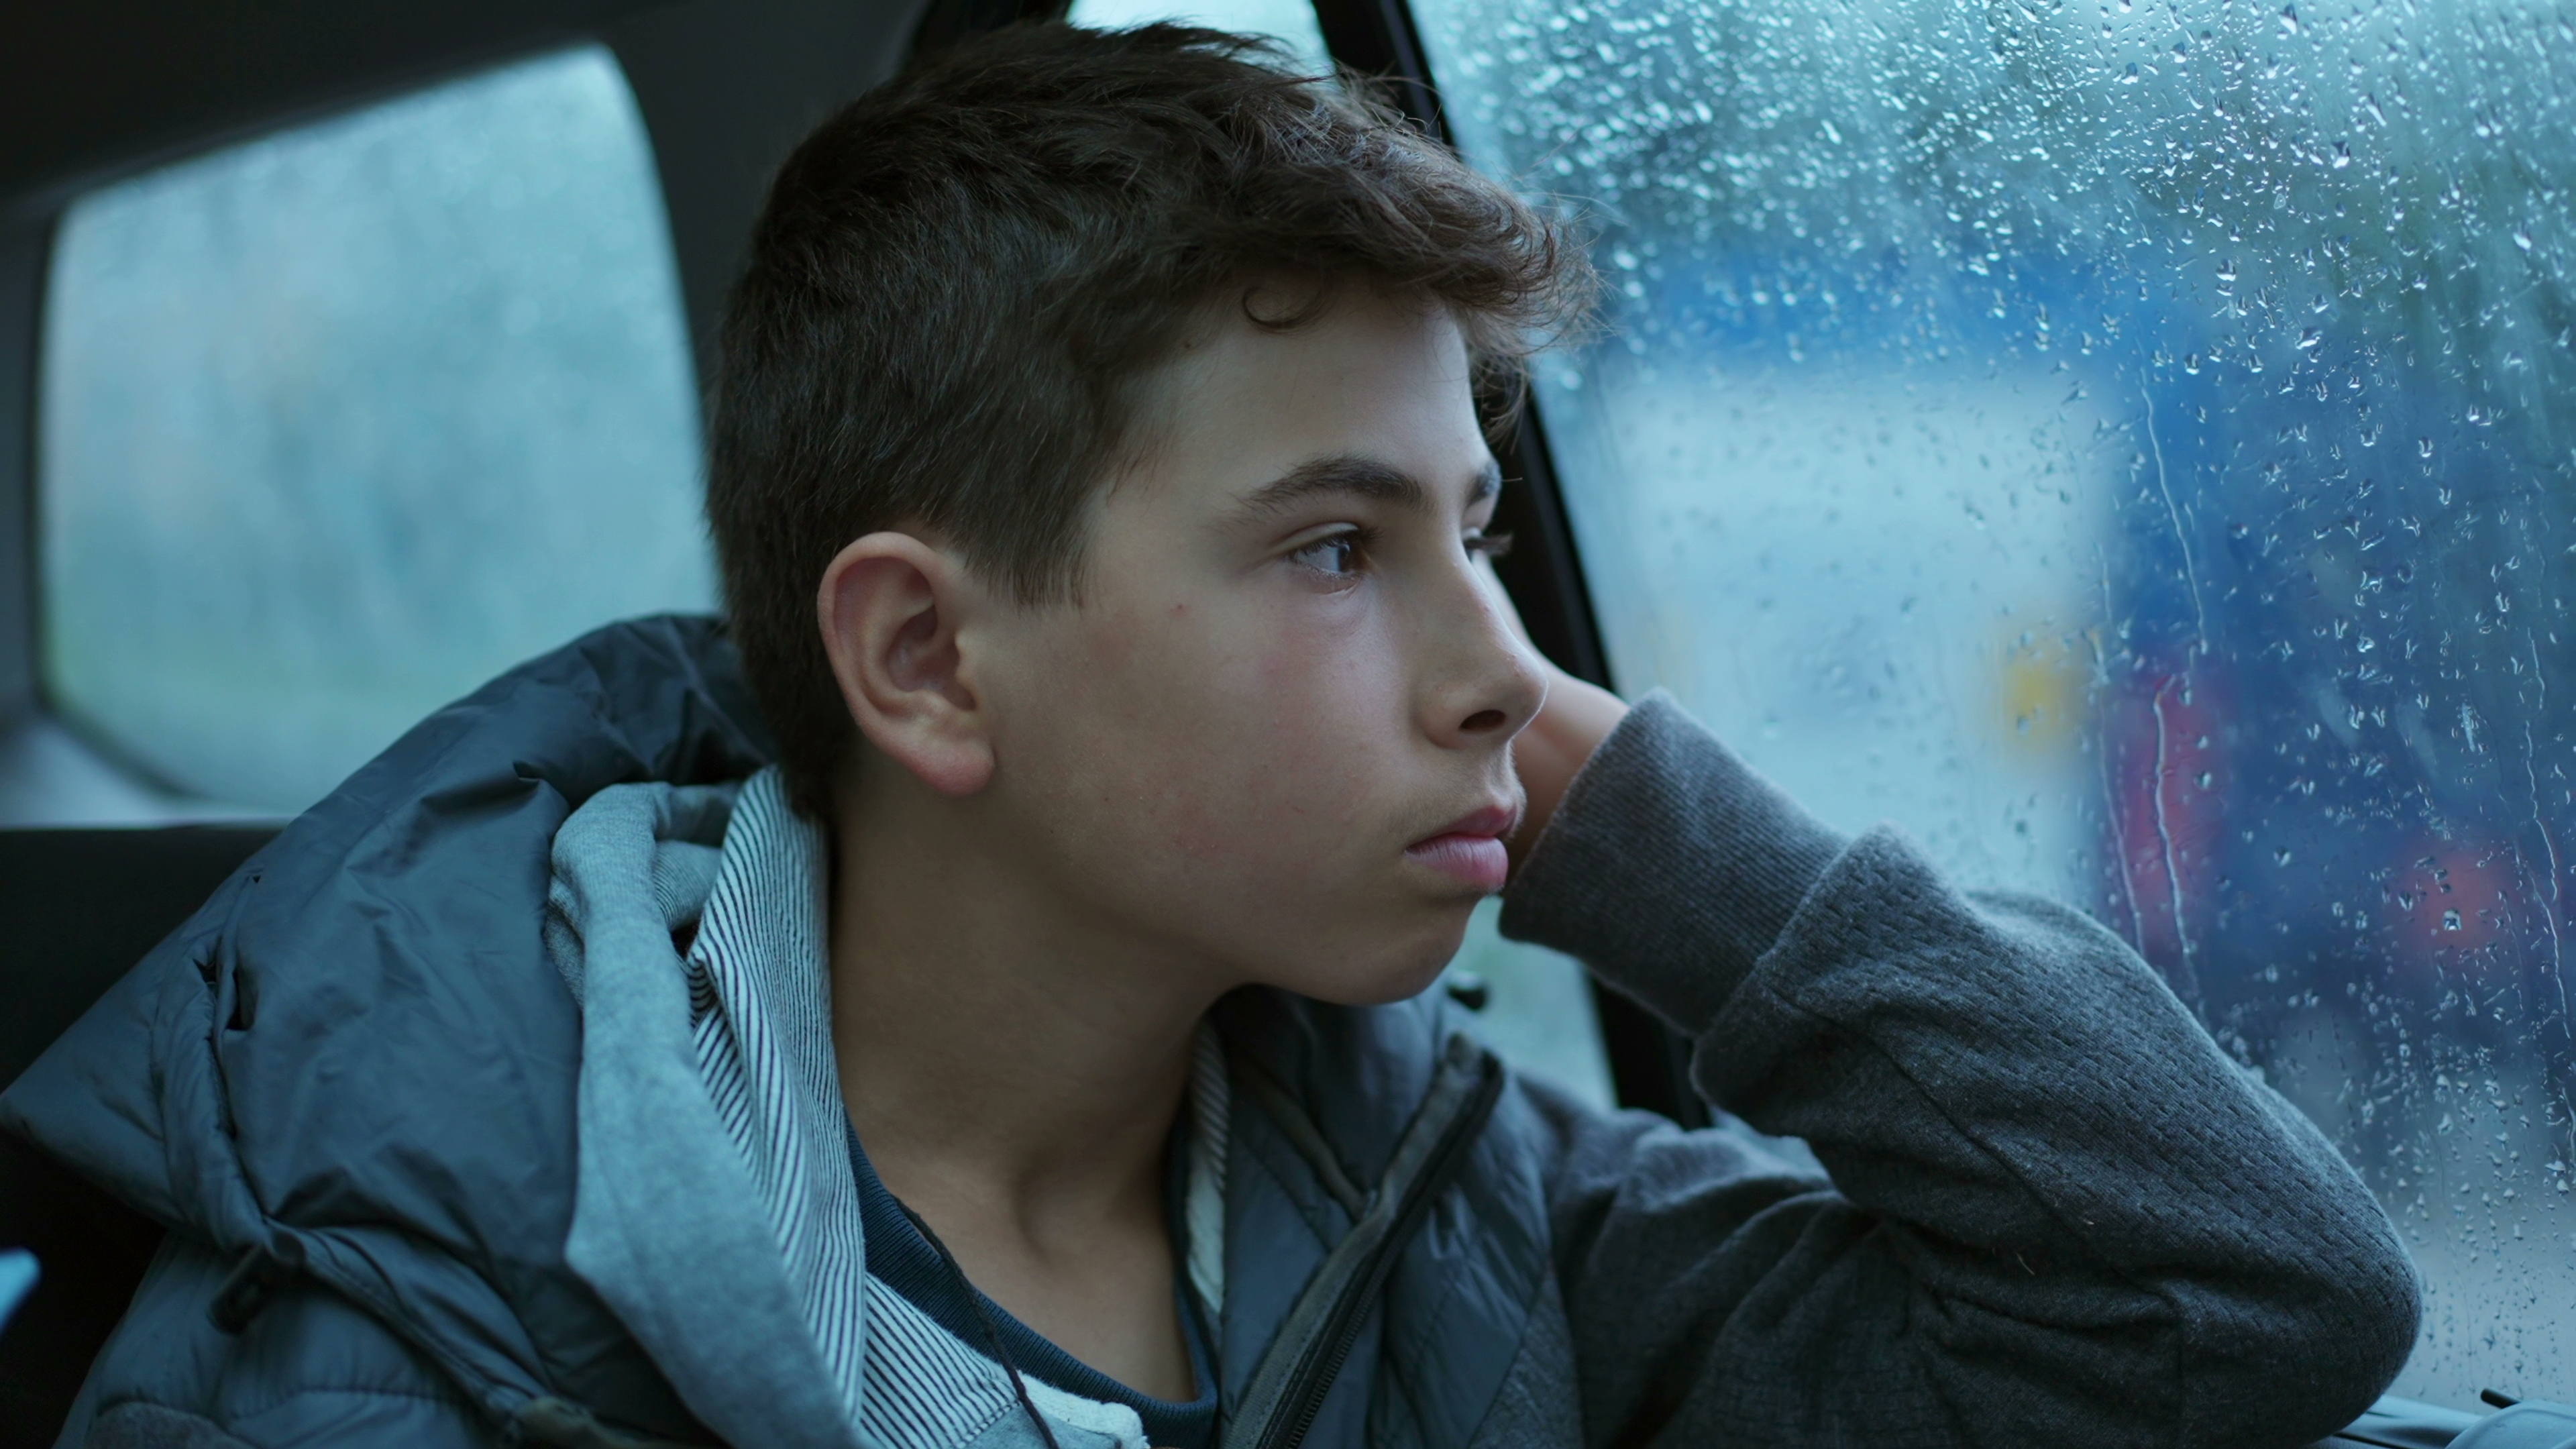 Thoughtful young boy seated in car backseat staring at glass window looking at landscape passing by. | Source: Shutterstock